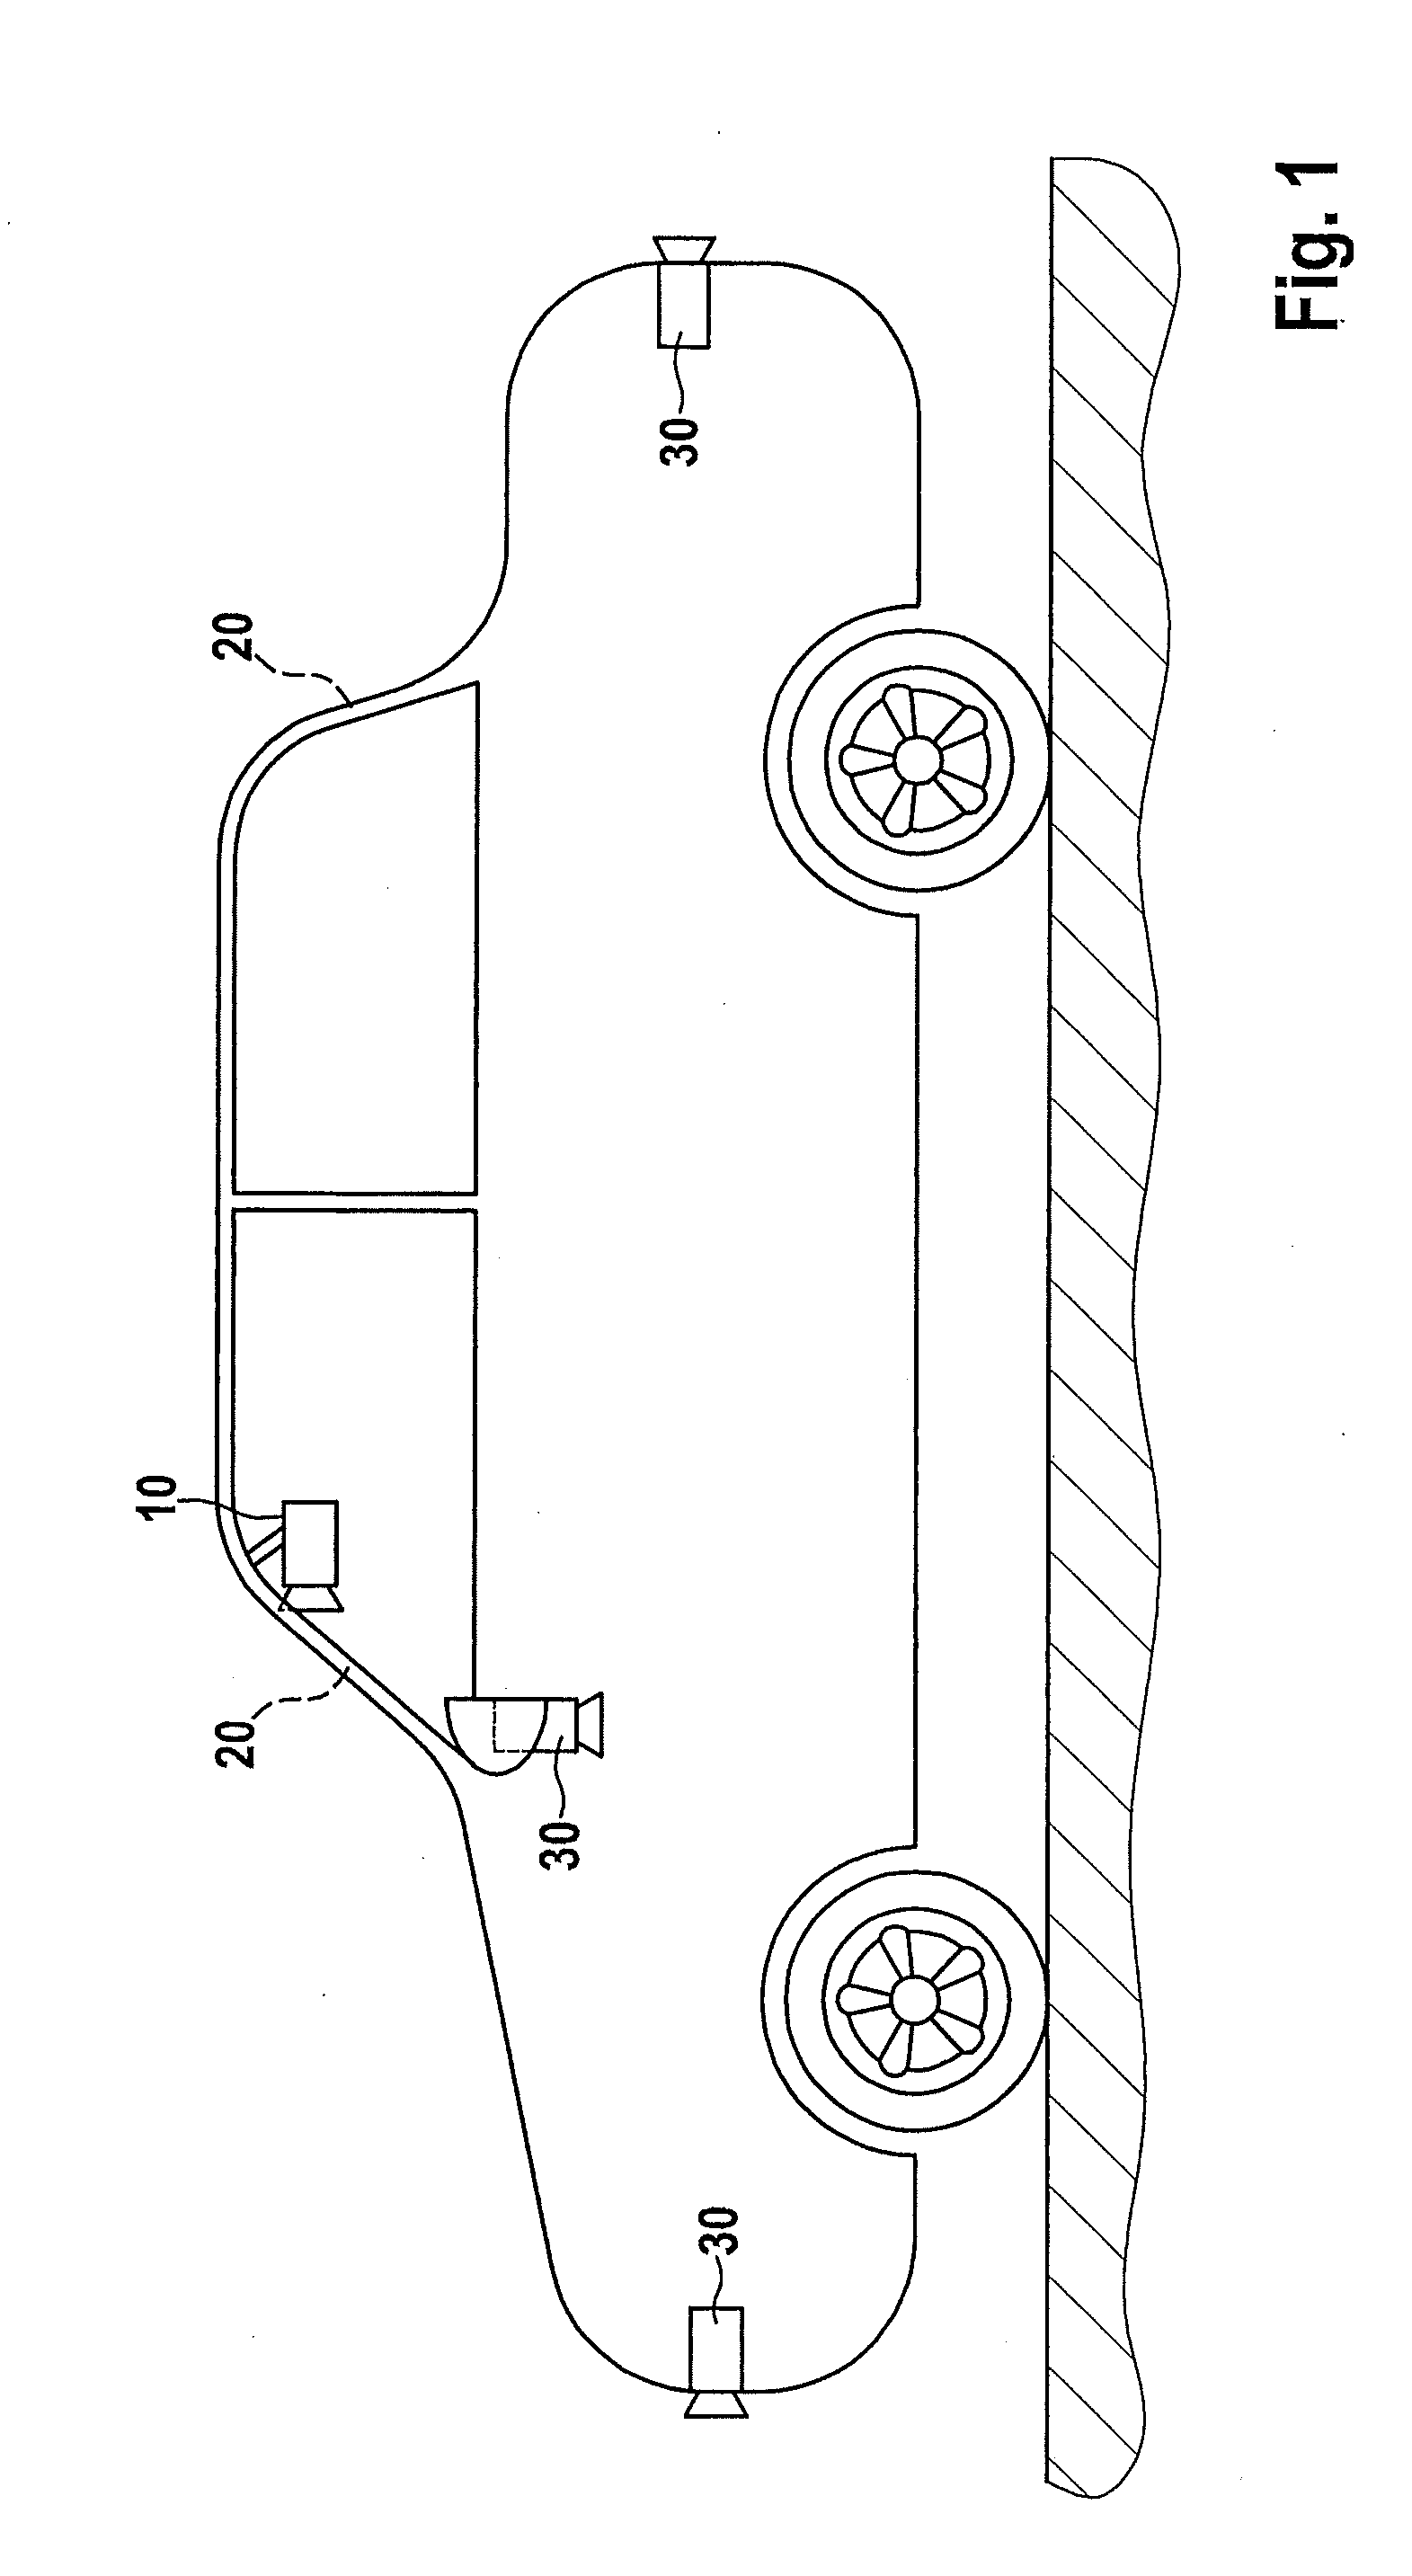 Actuating device for a device for monitoring the vehicle surroundings